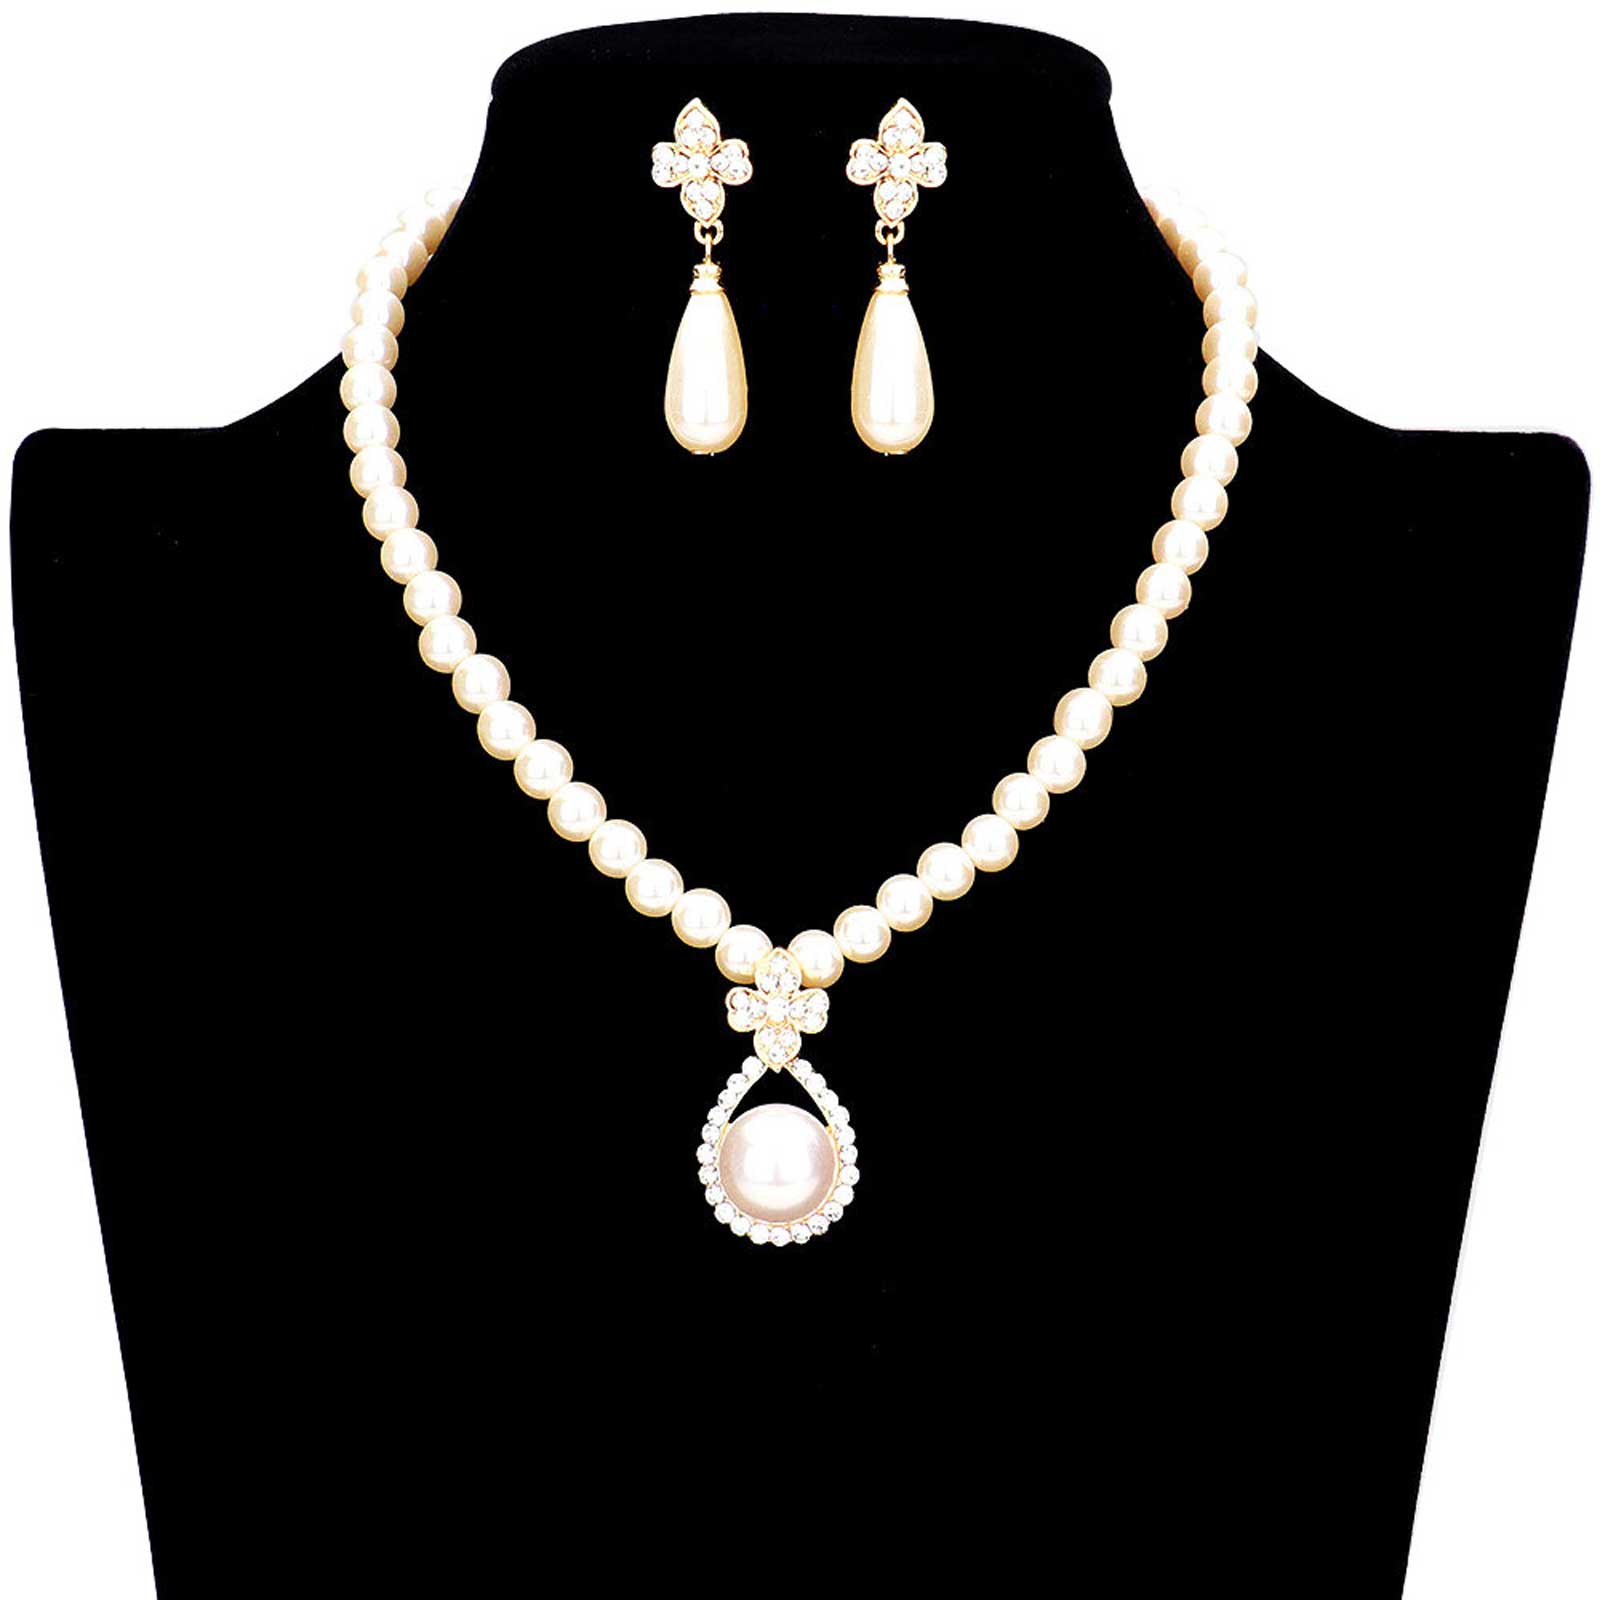 Cream Pearl Centered Rhinestone Trimmed Teardrop Accented Necklace, put on a pop of color to complete your ensemble. Perfect for adding just the right amount of shimmer & shine and a touch of class to special events. Perfect Birthday Gift, Anniversary Gift, Mother's Day Gift, Graduation Gift, Valentine’s Gift.